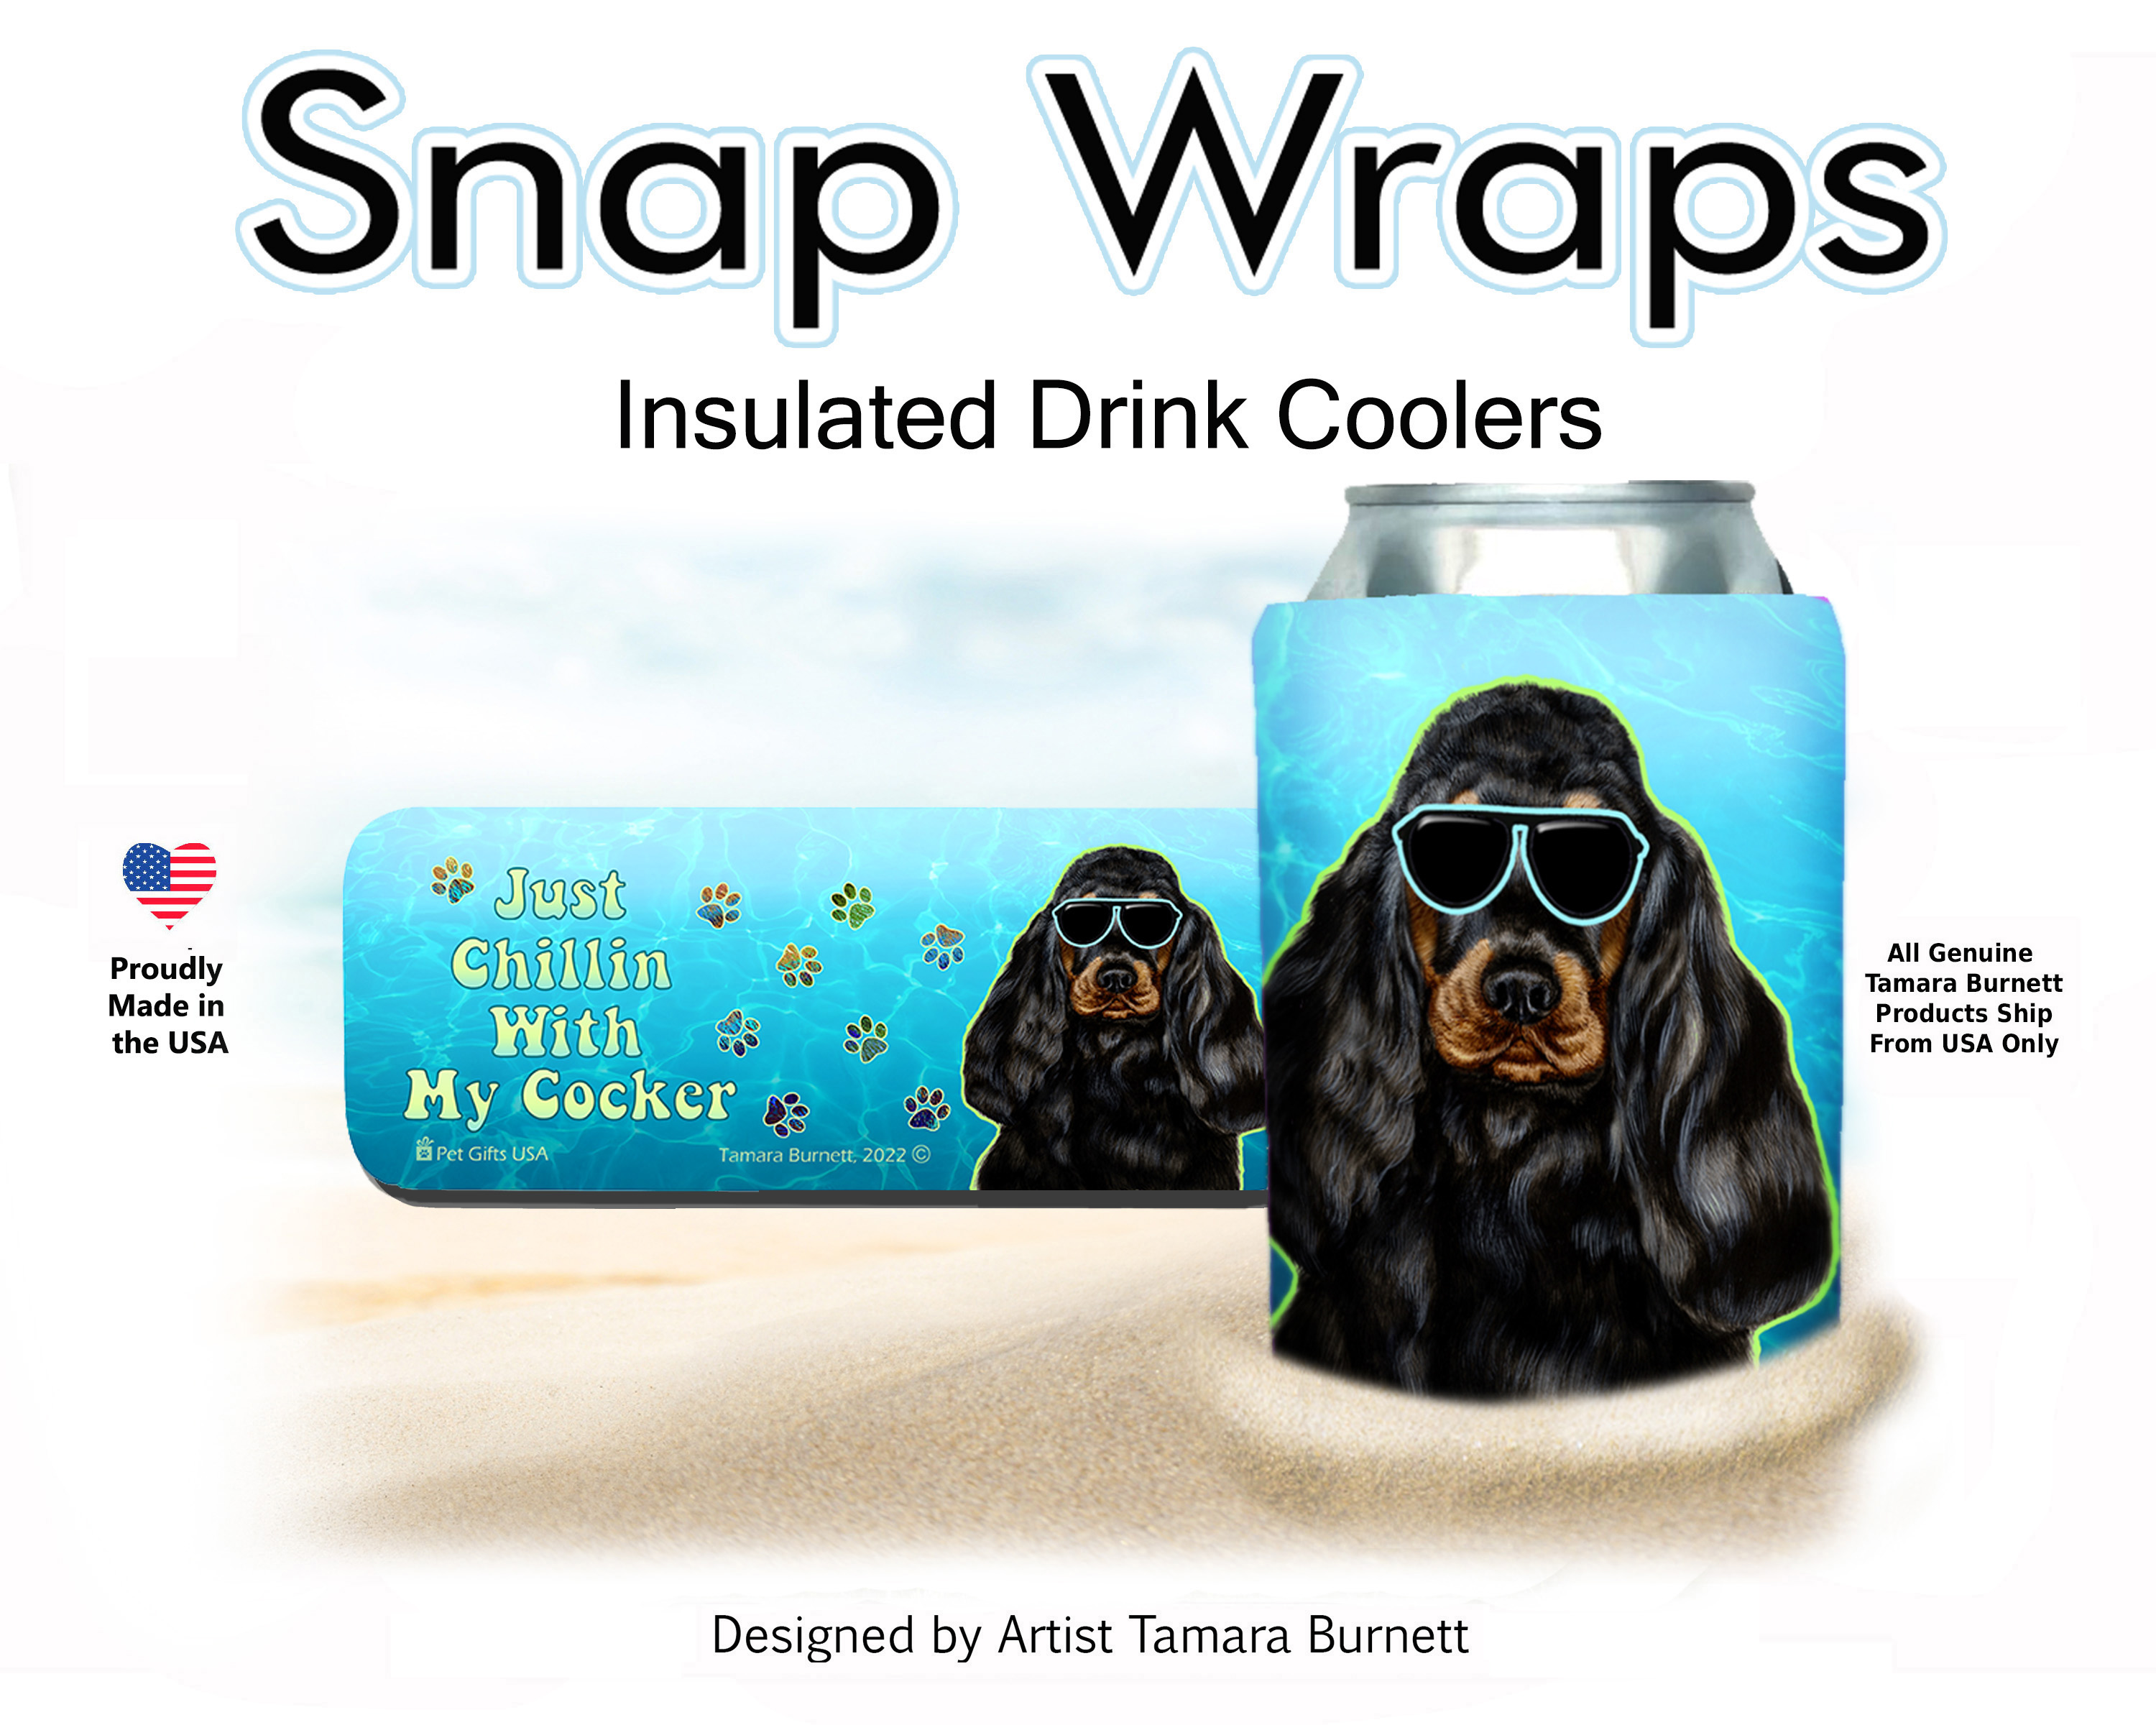 An image of the Cocker Spaniel Black & Tan Snap Wrap Insulated Drink Holder